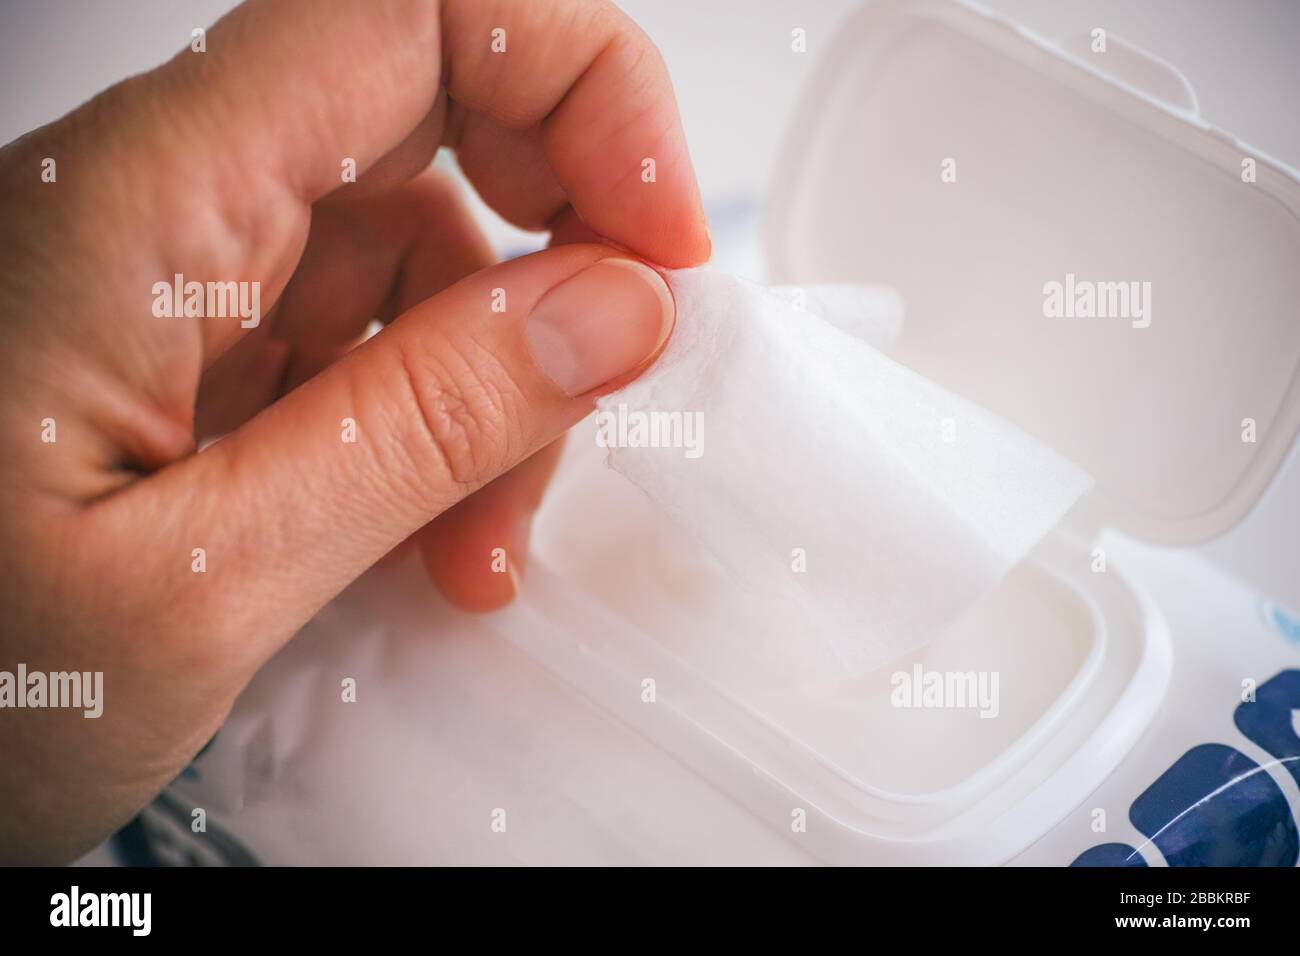 Woman hand taking wet wipe from package. Stock Photo